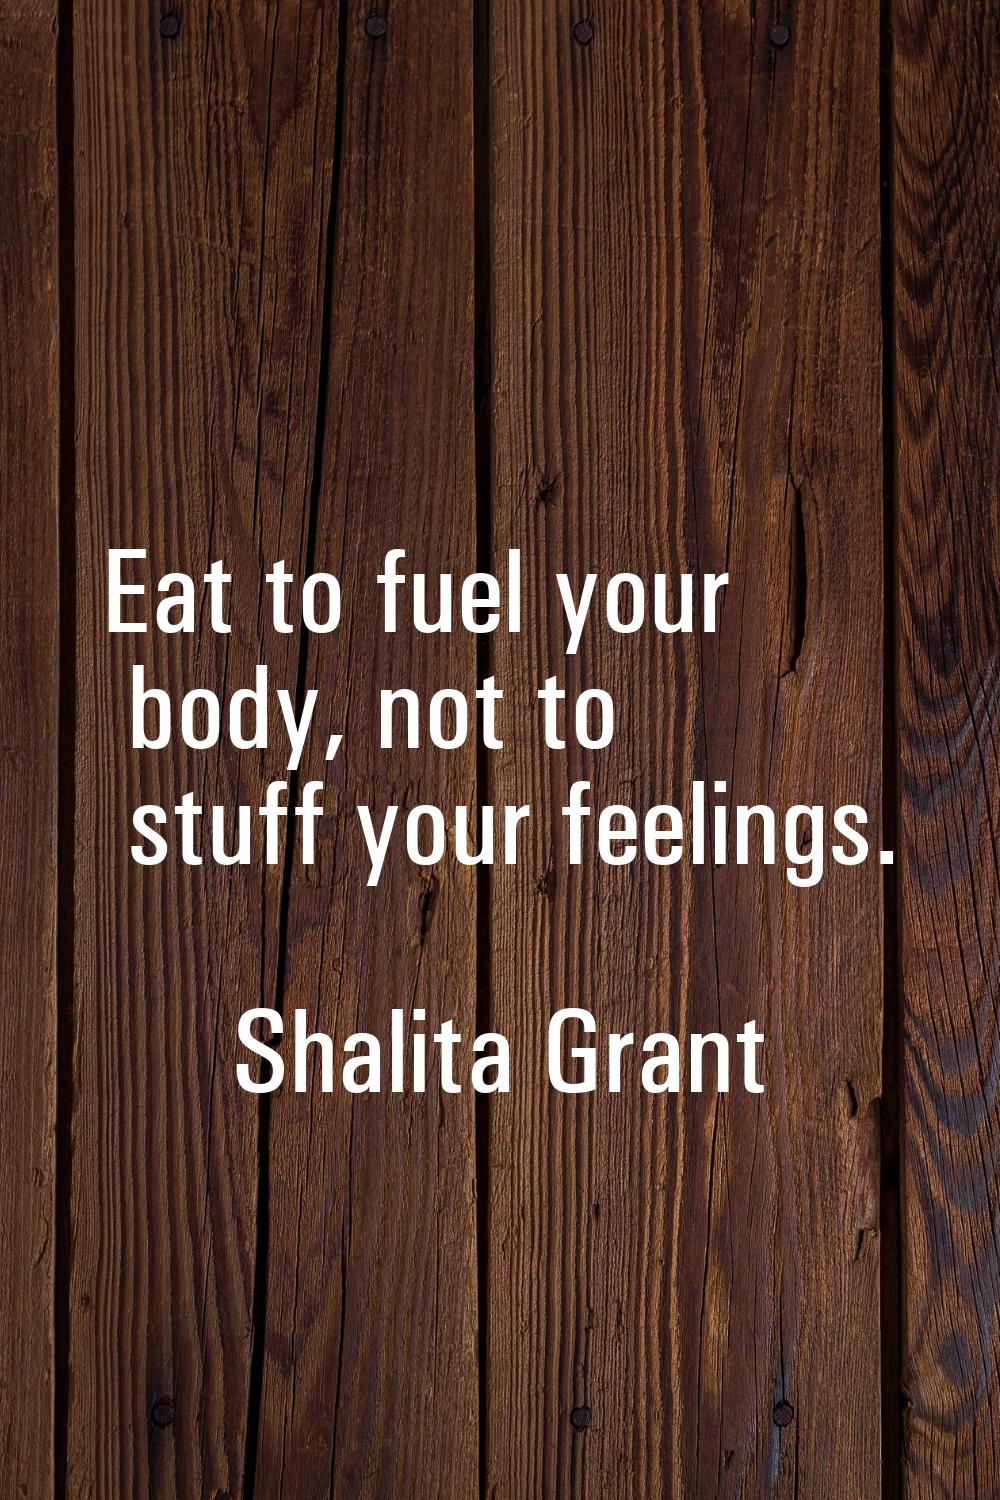 Eat to fuel your body, not to stuff your feelings.